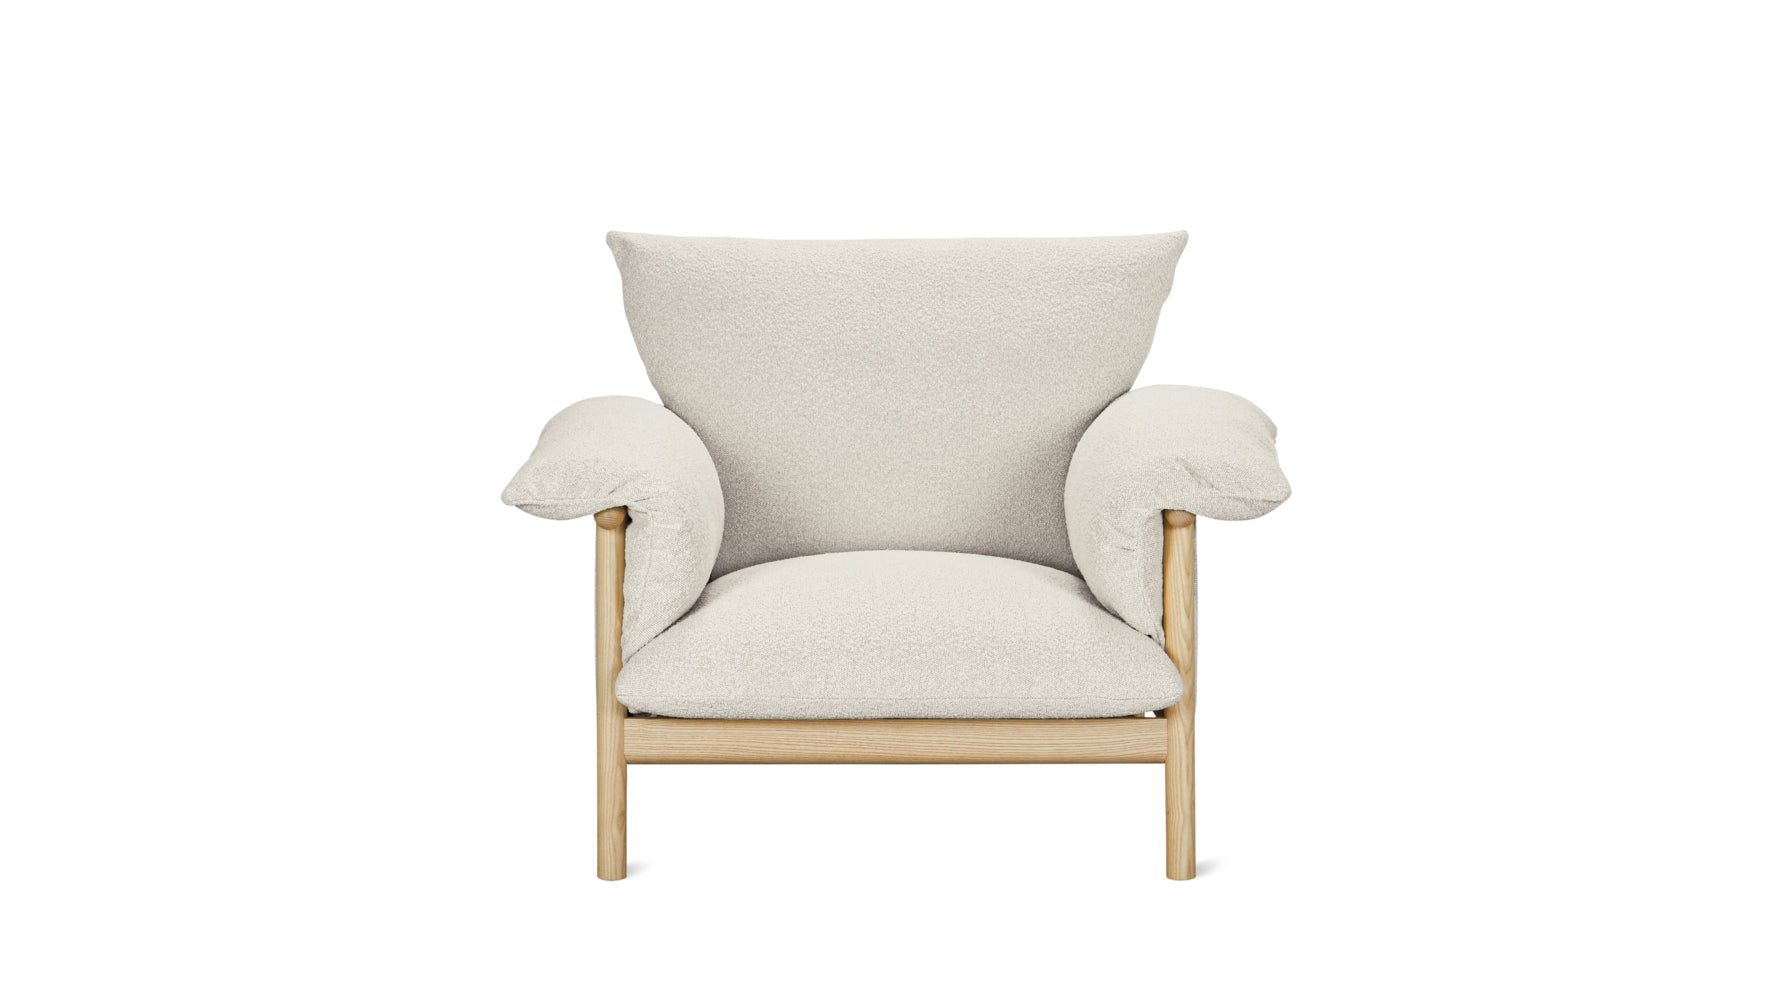 Pillow Talk Lounge Chair, Warm Frost - Image 2